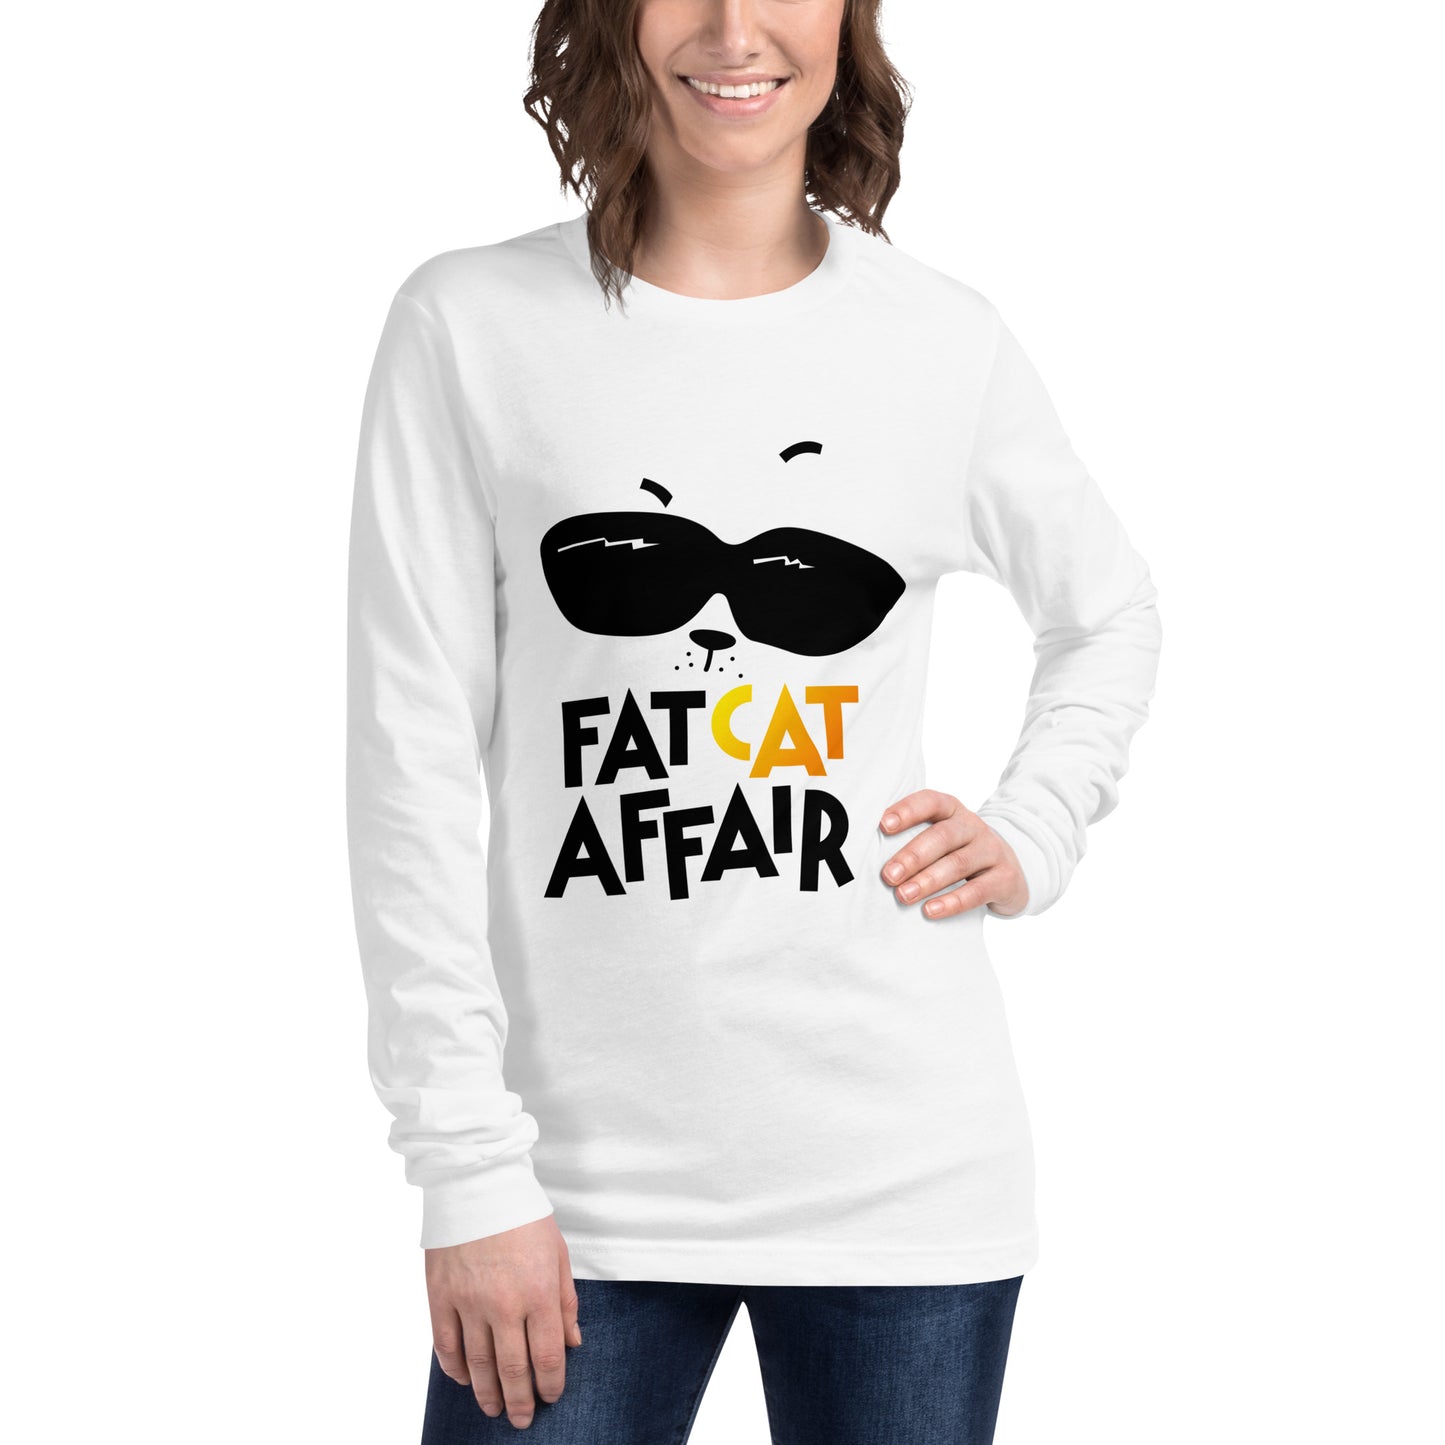 ladies white long sleeve top with cat print